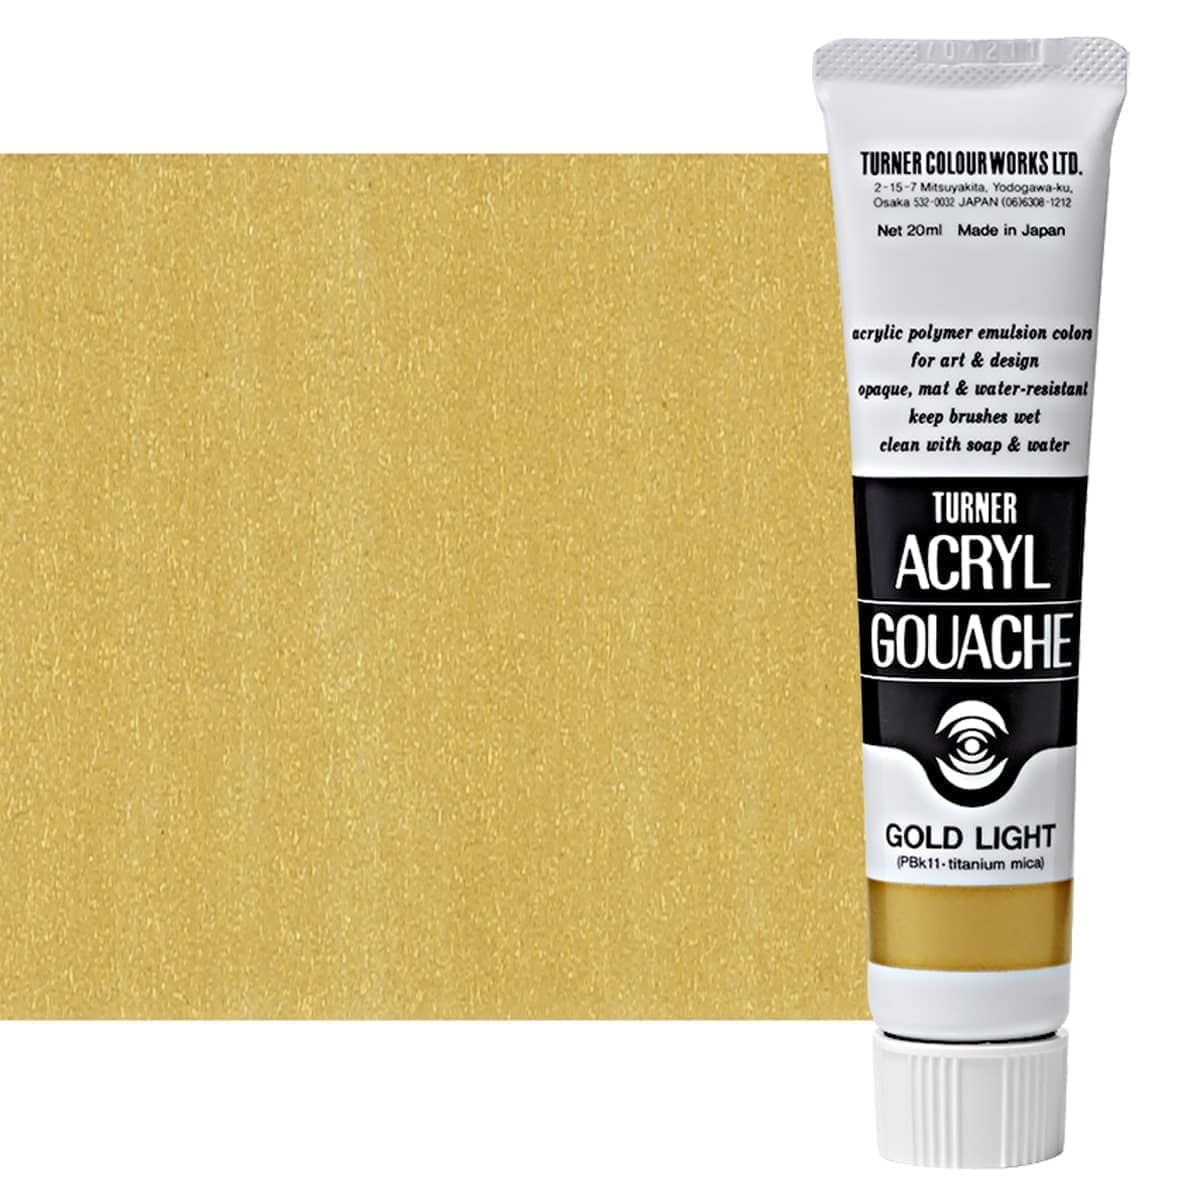 Turner Acrylic Gouache is great if you want a matte, opaque finish